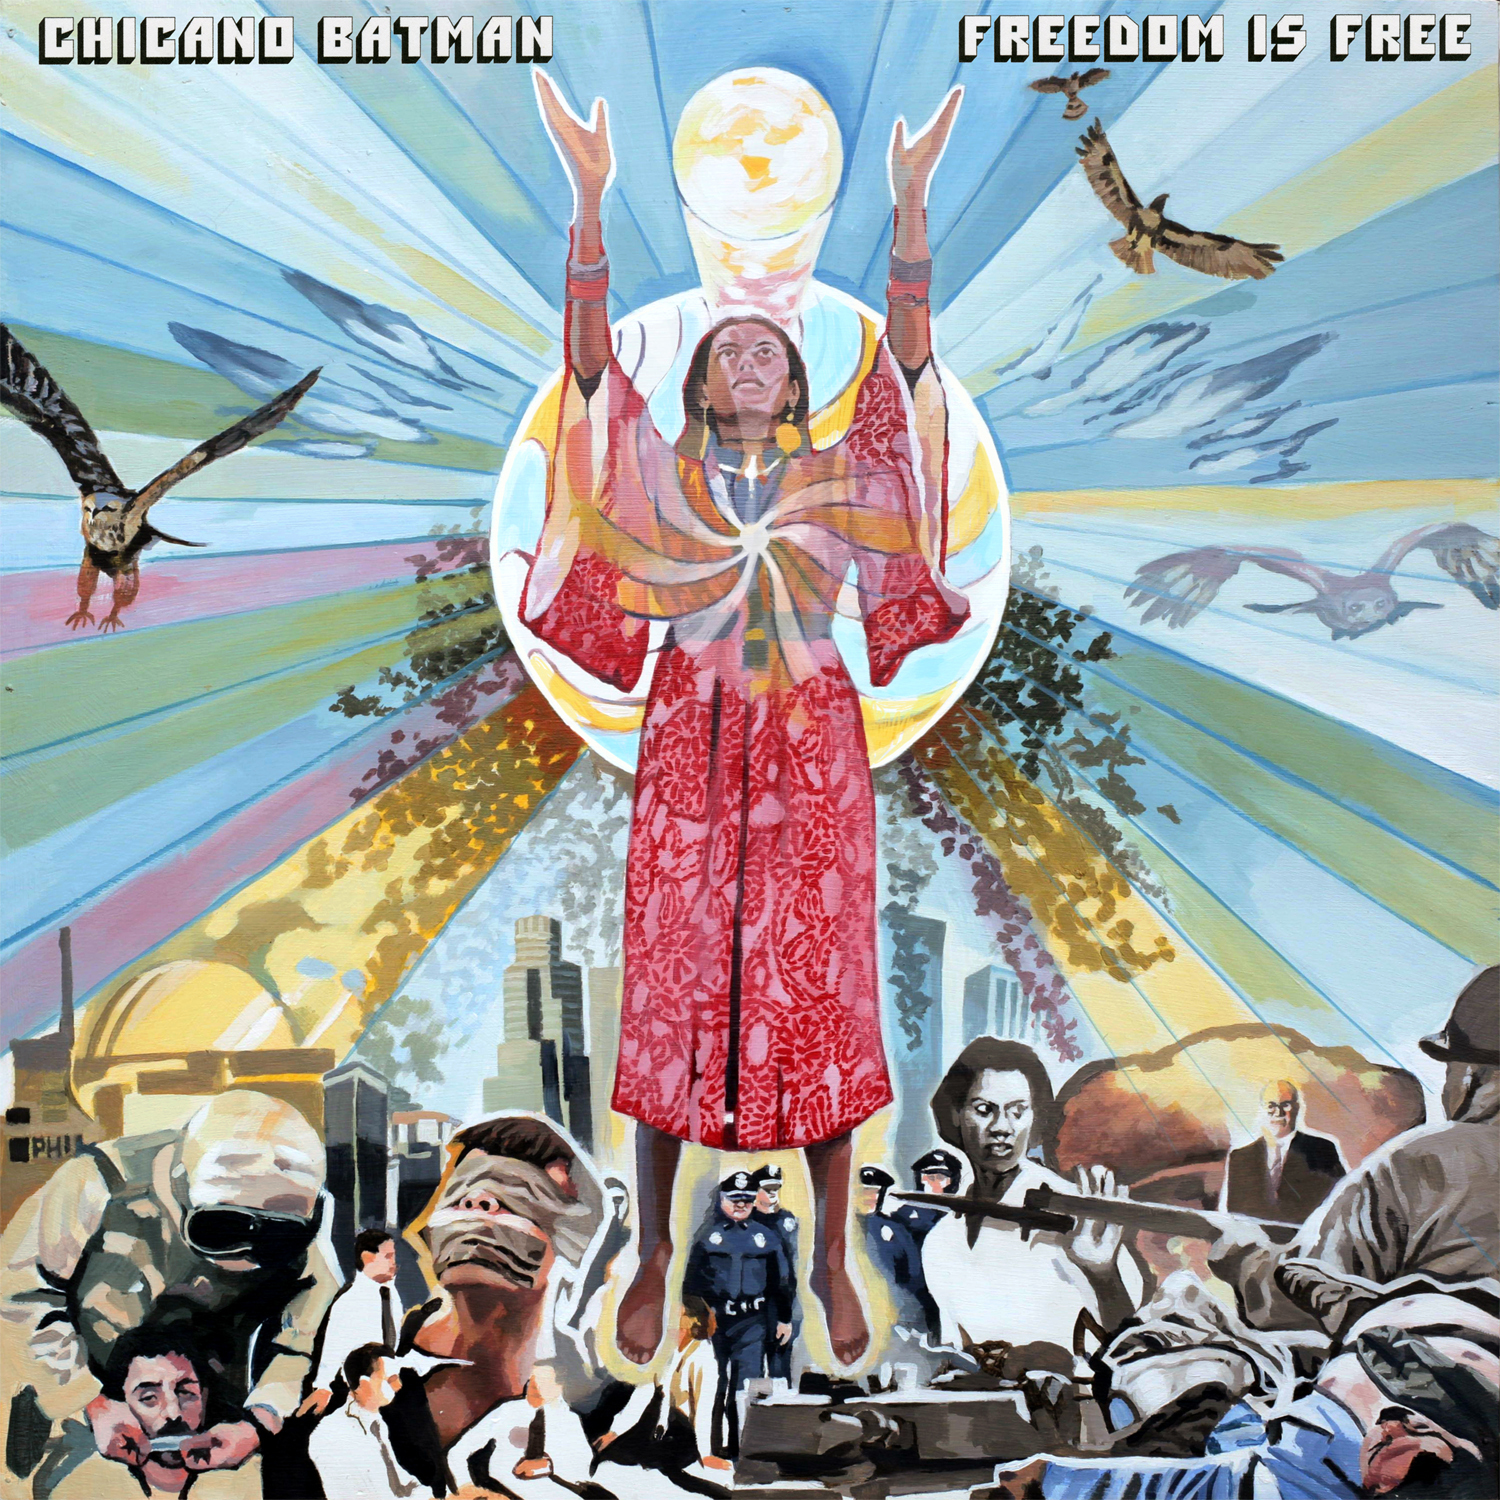 An abstract cover with an indigenous woman worshiping a sun above policemen, dead people, guns, and police brutality.